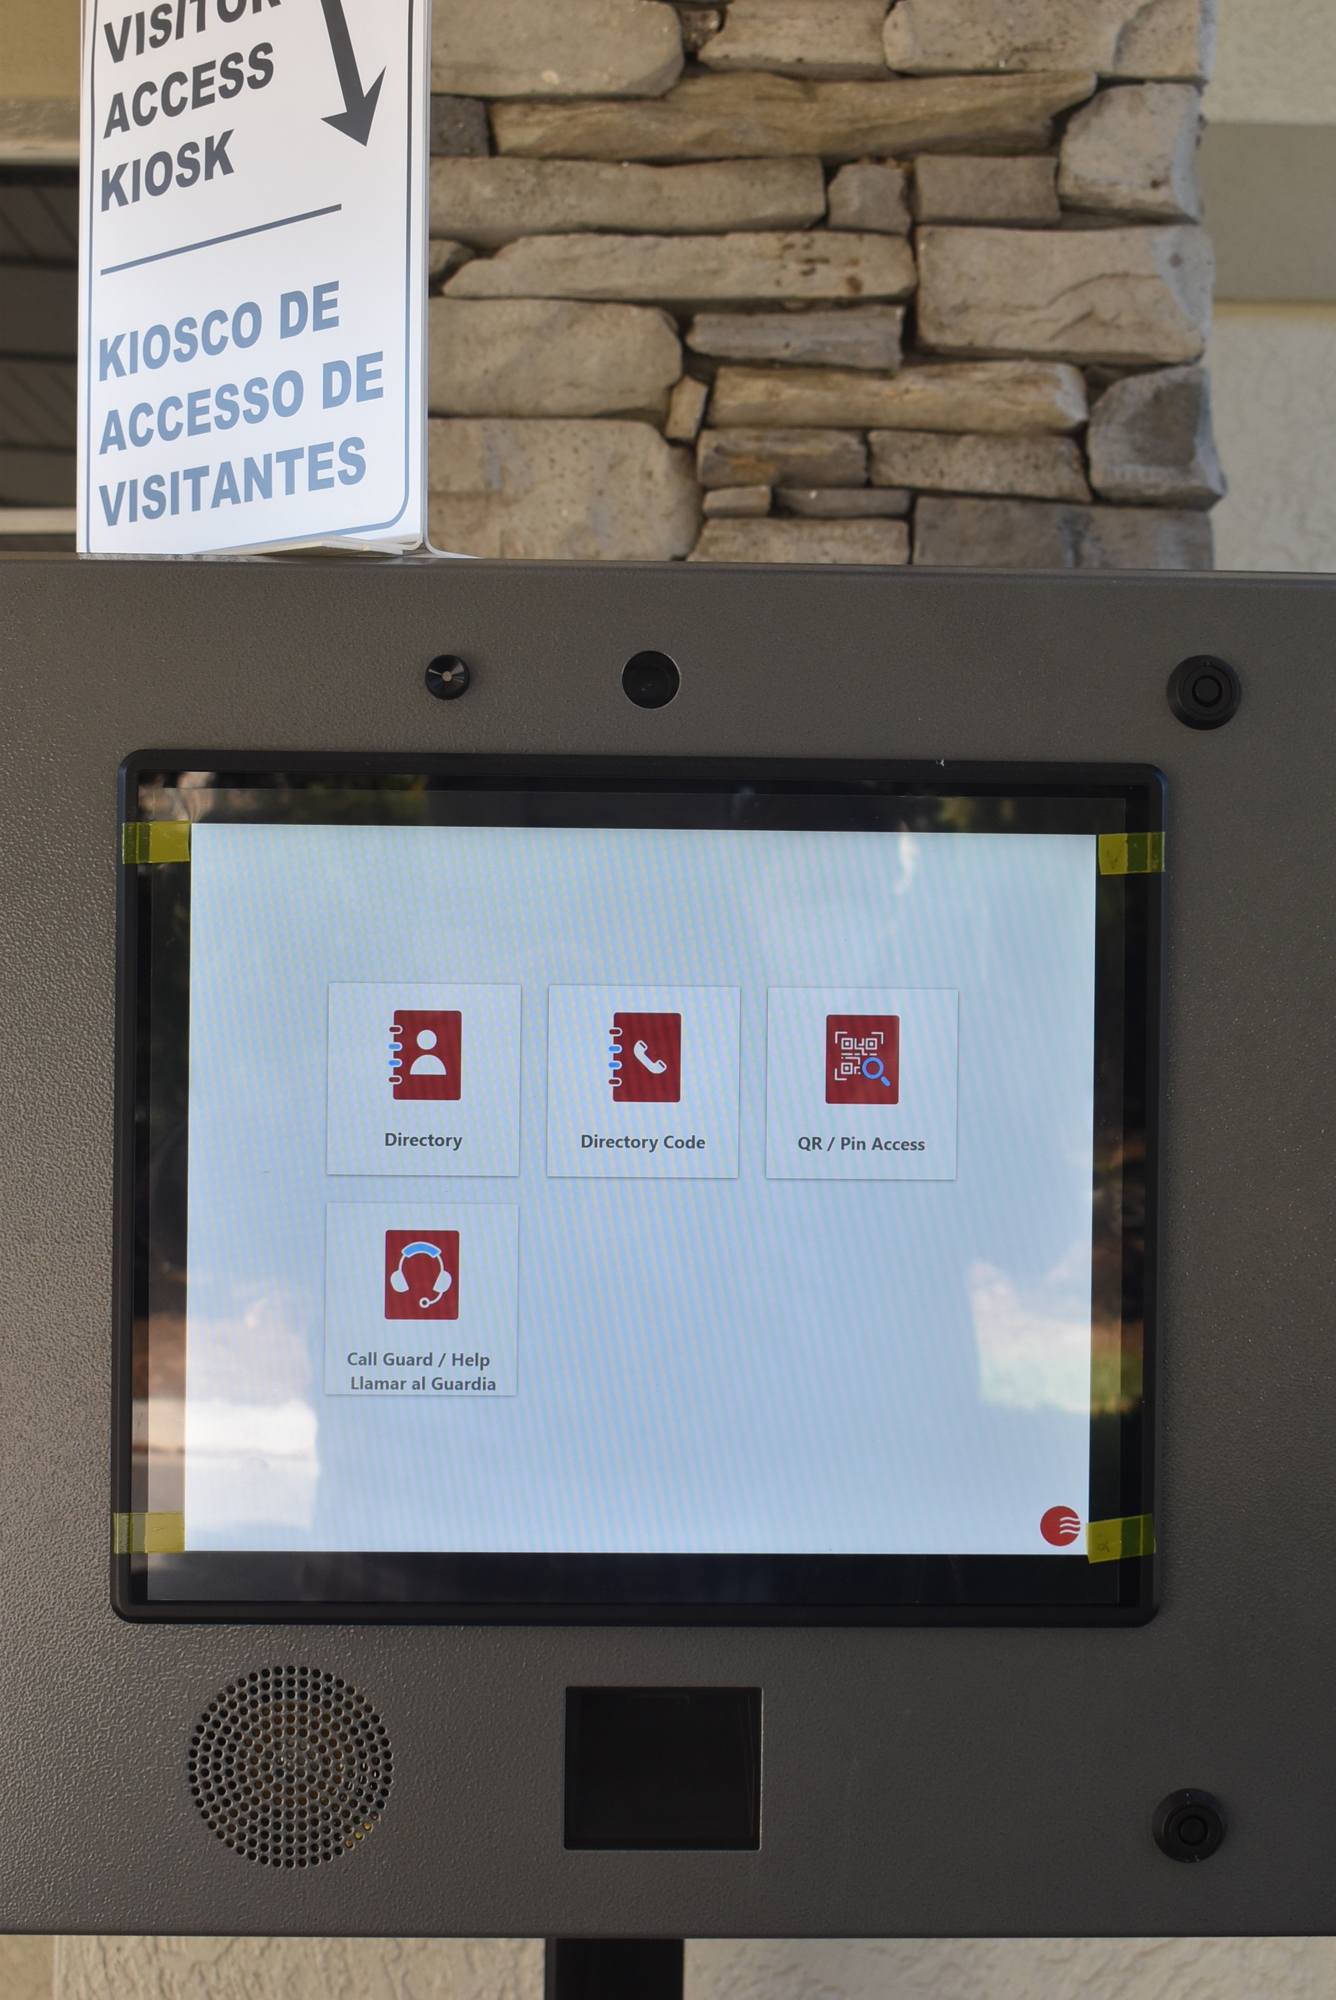 The new kiosks allow guests to scan a QR barcode to gain entry, which is much more efficient than using a guard to record the guest's information.